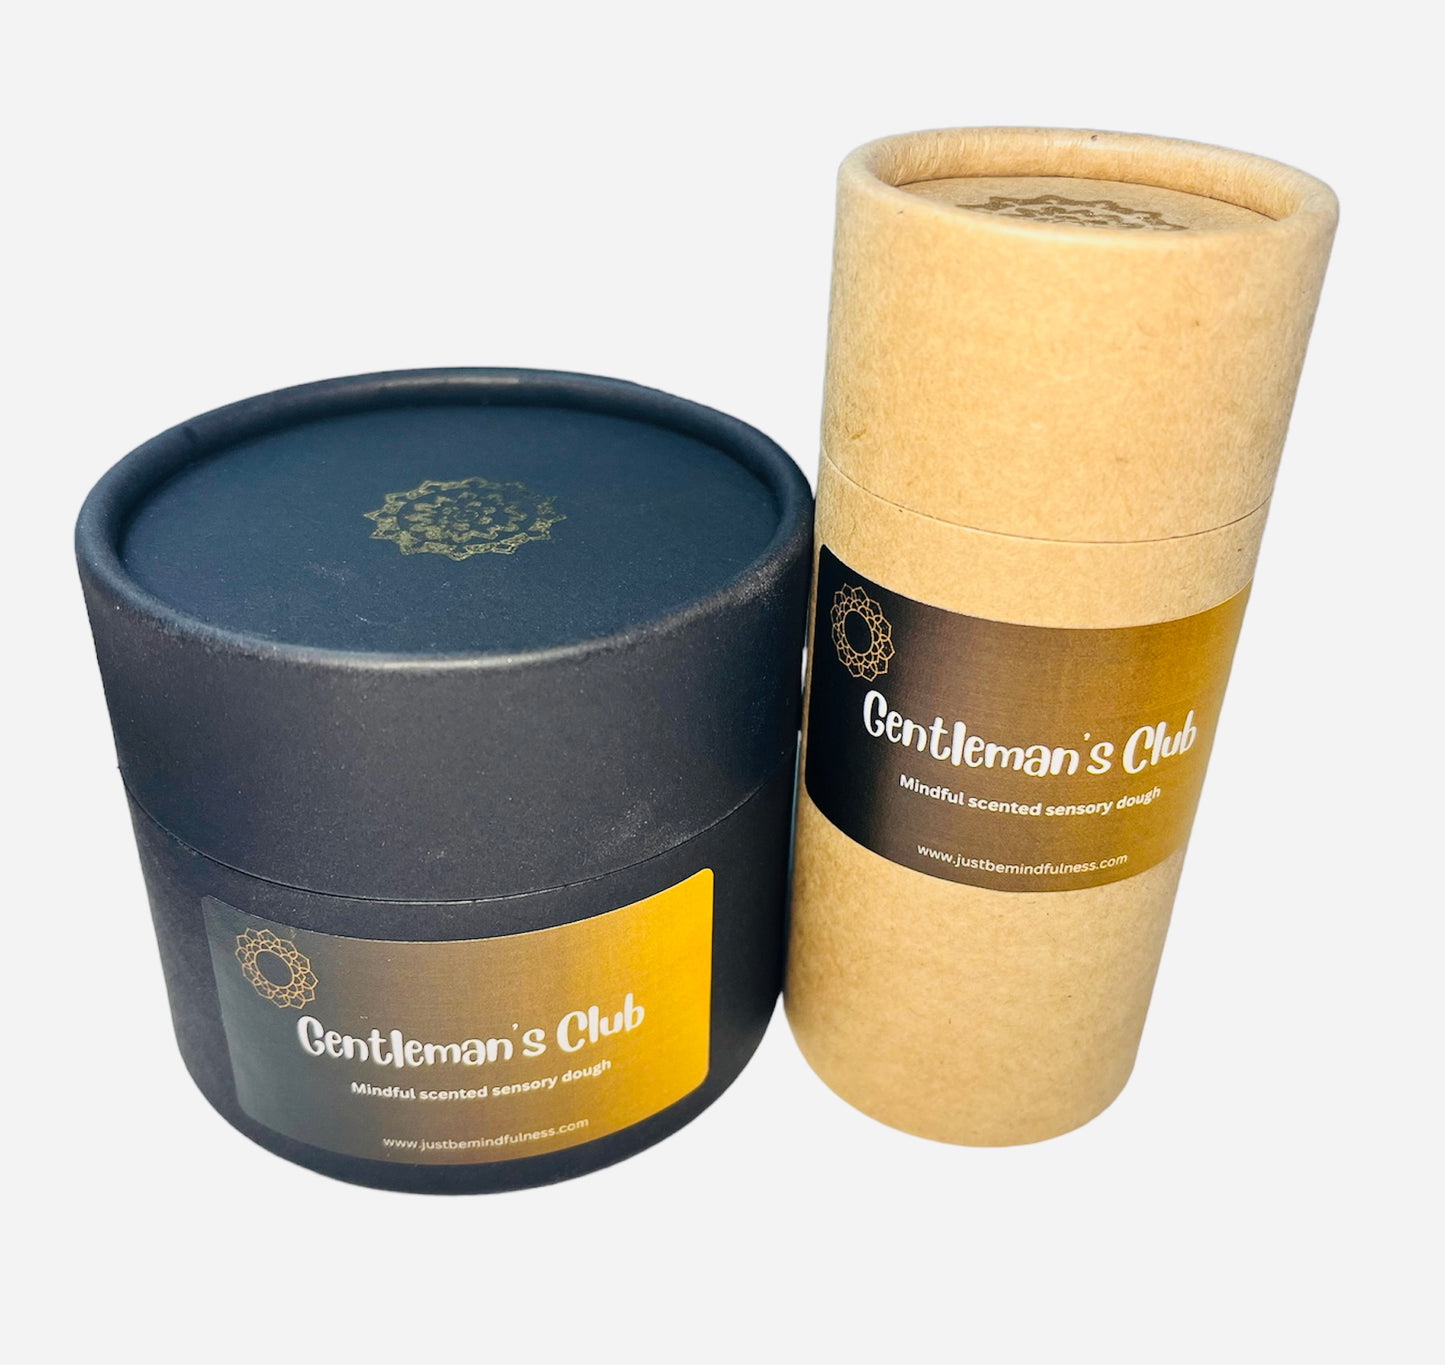 Mindful Scented Sensory Dough - Gentleman's Club set - men's mental health & wellbeing. Therapy dough.